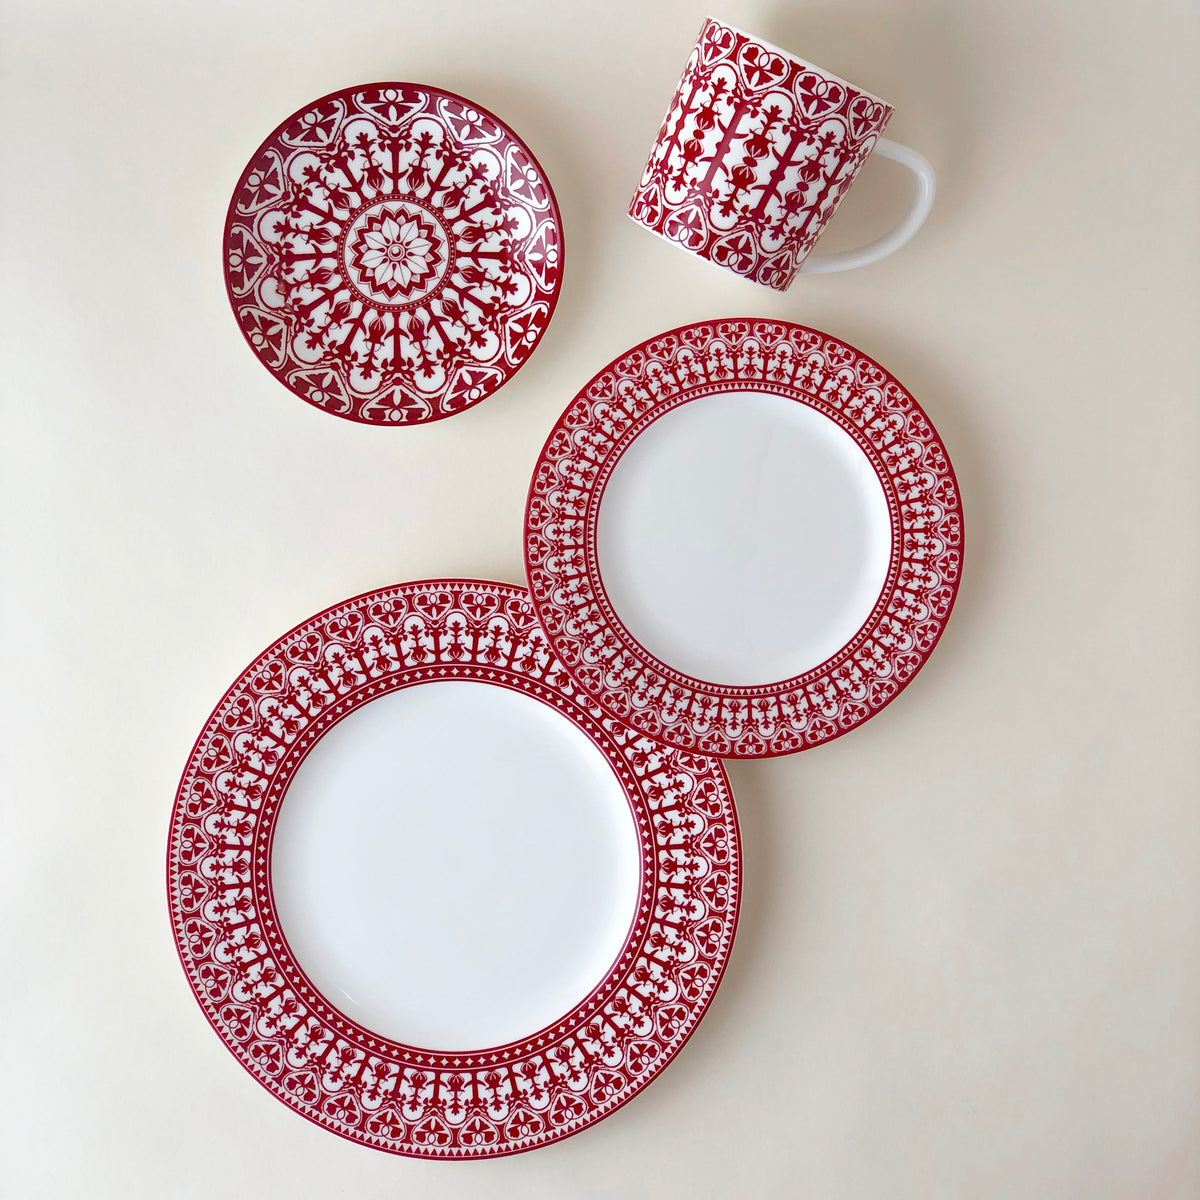 A set of Casablanca Crimson Rimmed Dinner Plates from Caskata Artisanal Home, in red and white casablanca design on a white surface.